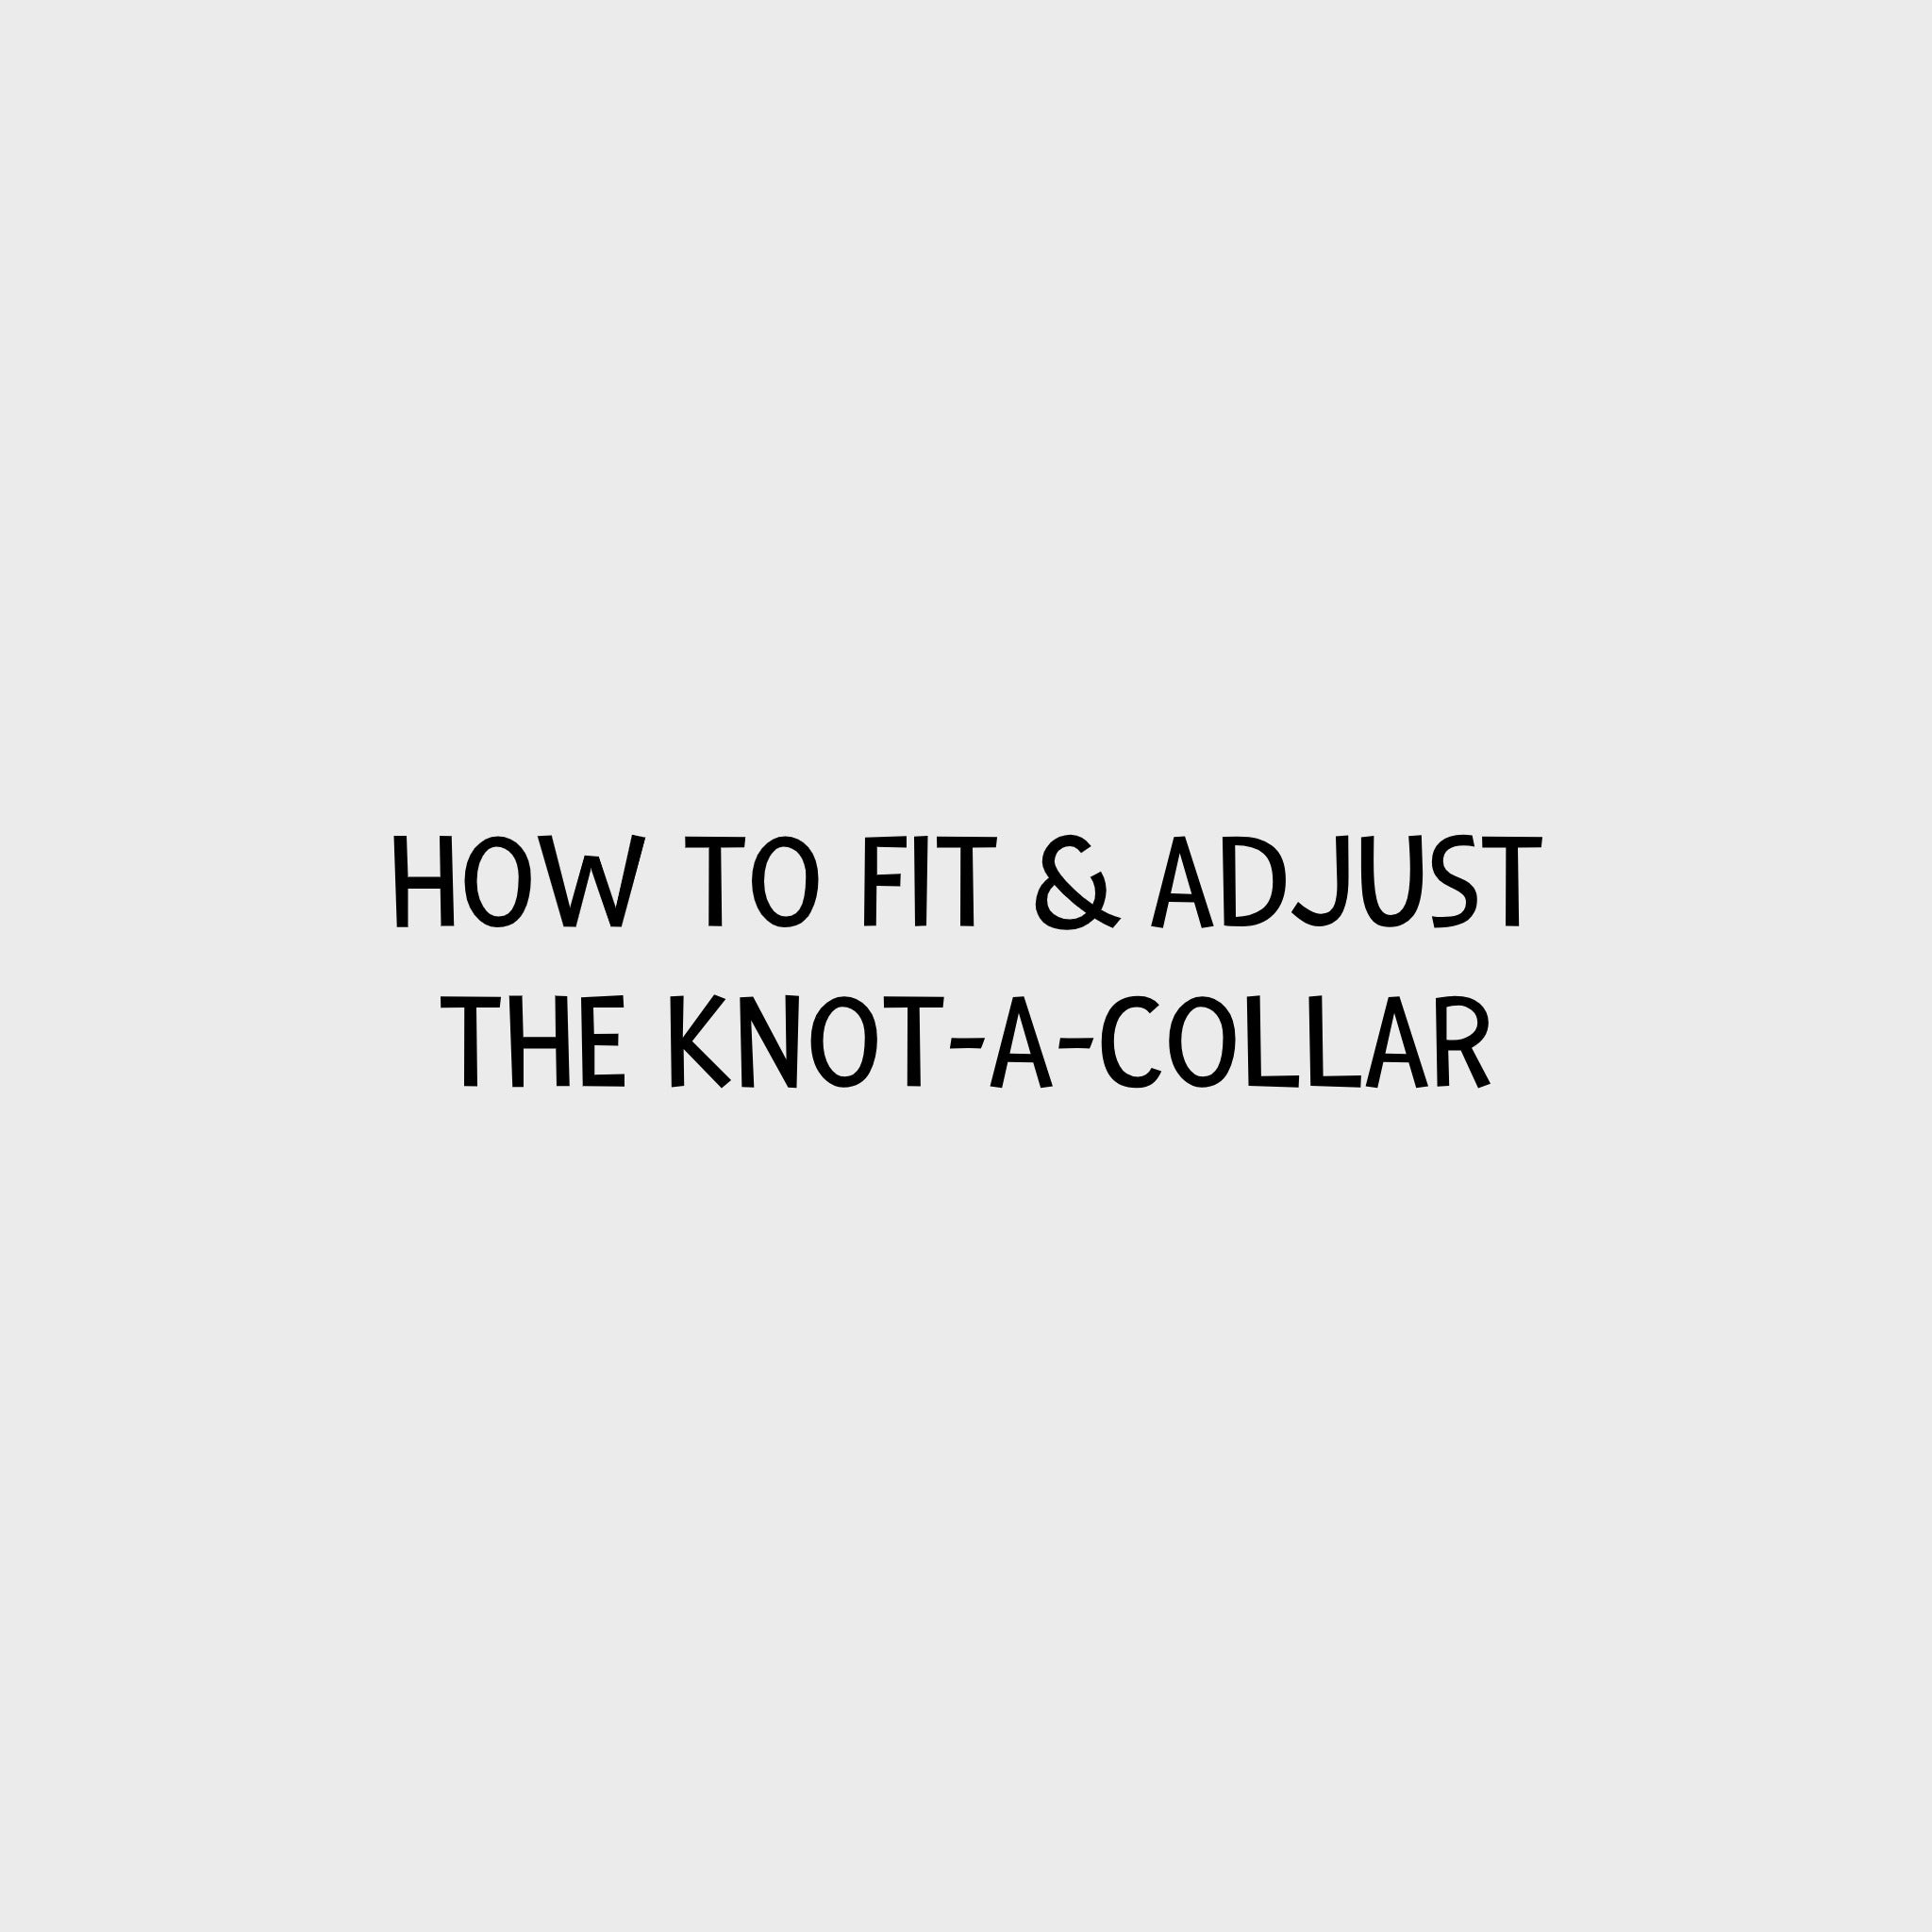 Video - How to Fit & Adjust the Knot-a-Collar